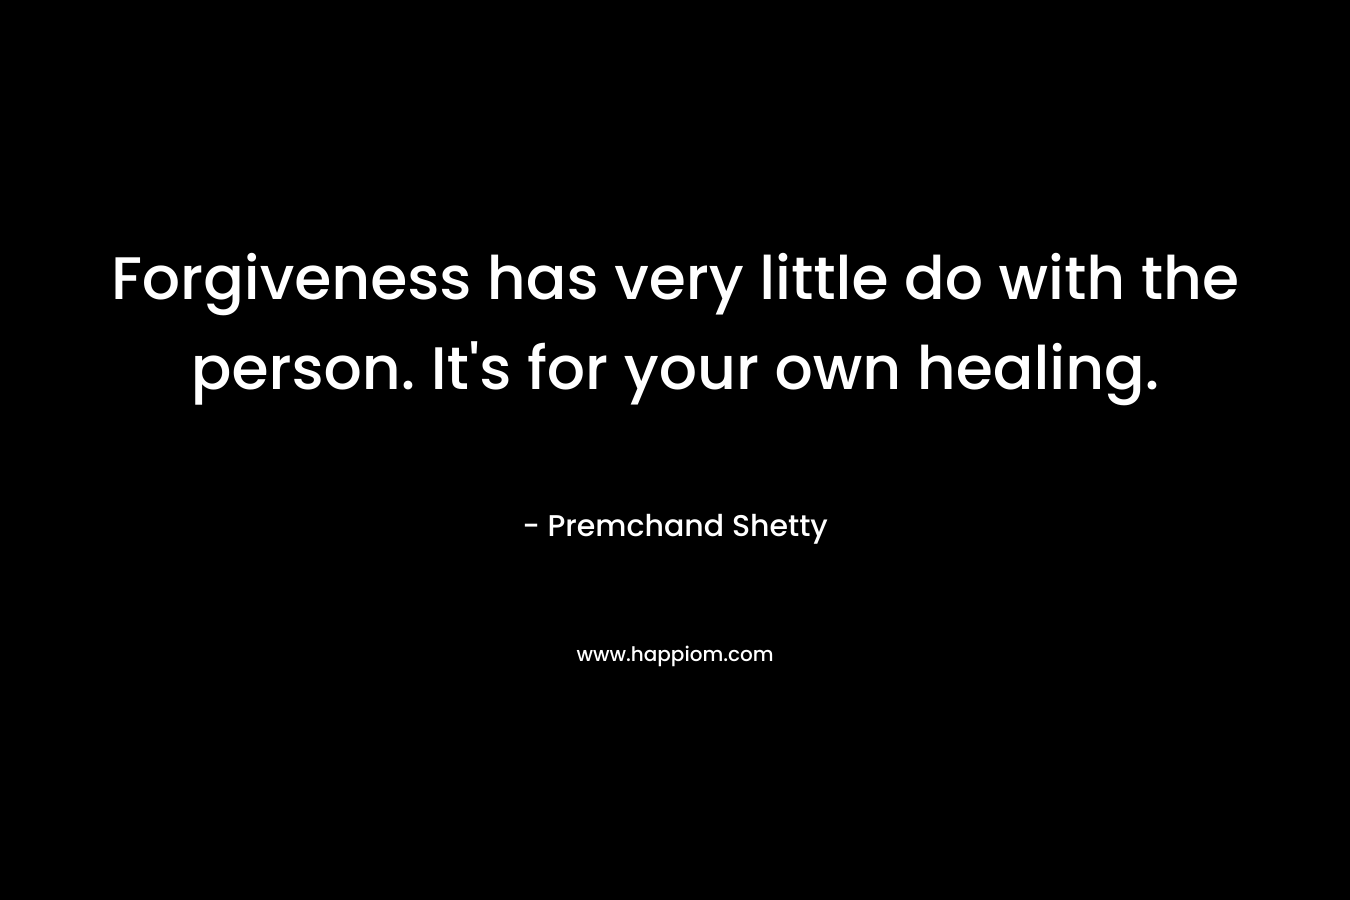 Forgiveness has very little do with the person. It’s for your own healing. – Premchand Shetty